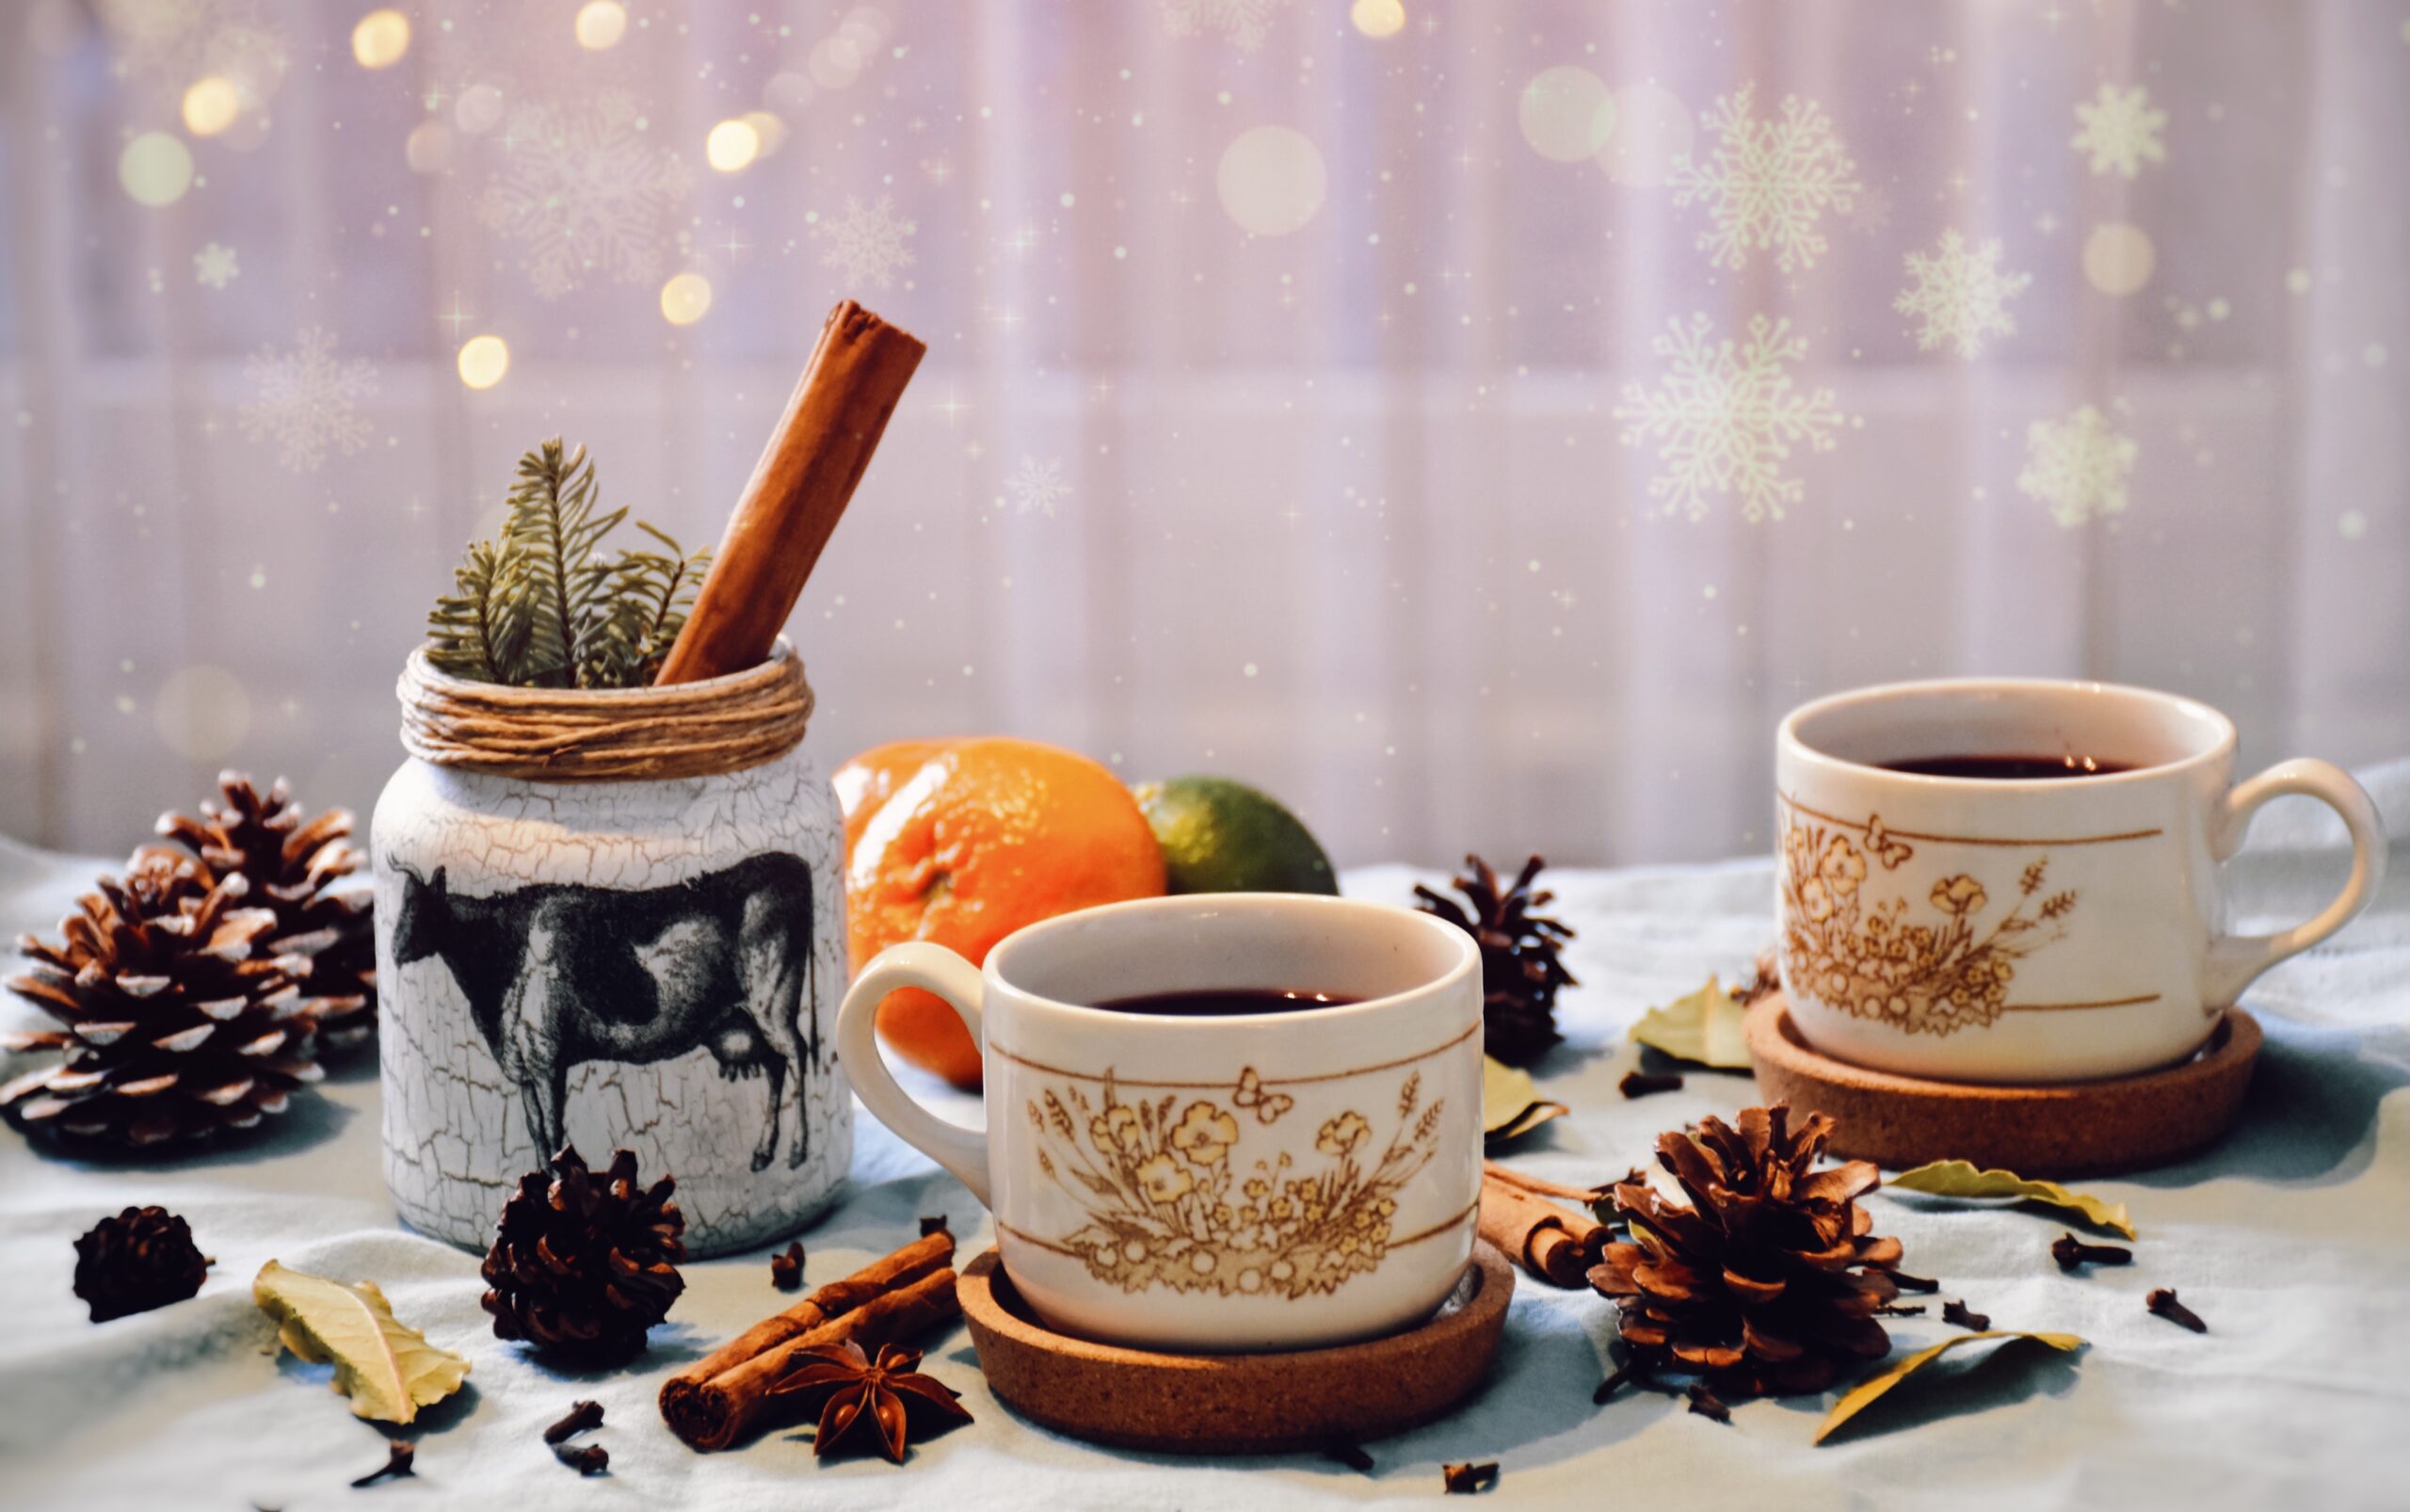 Winter Special, Homemade Spiced Mulled Wine Or Glühwein Recipe